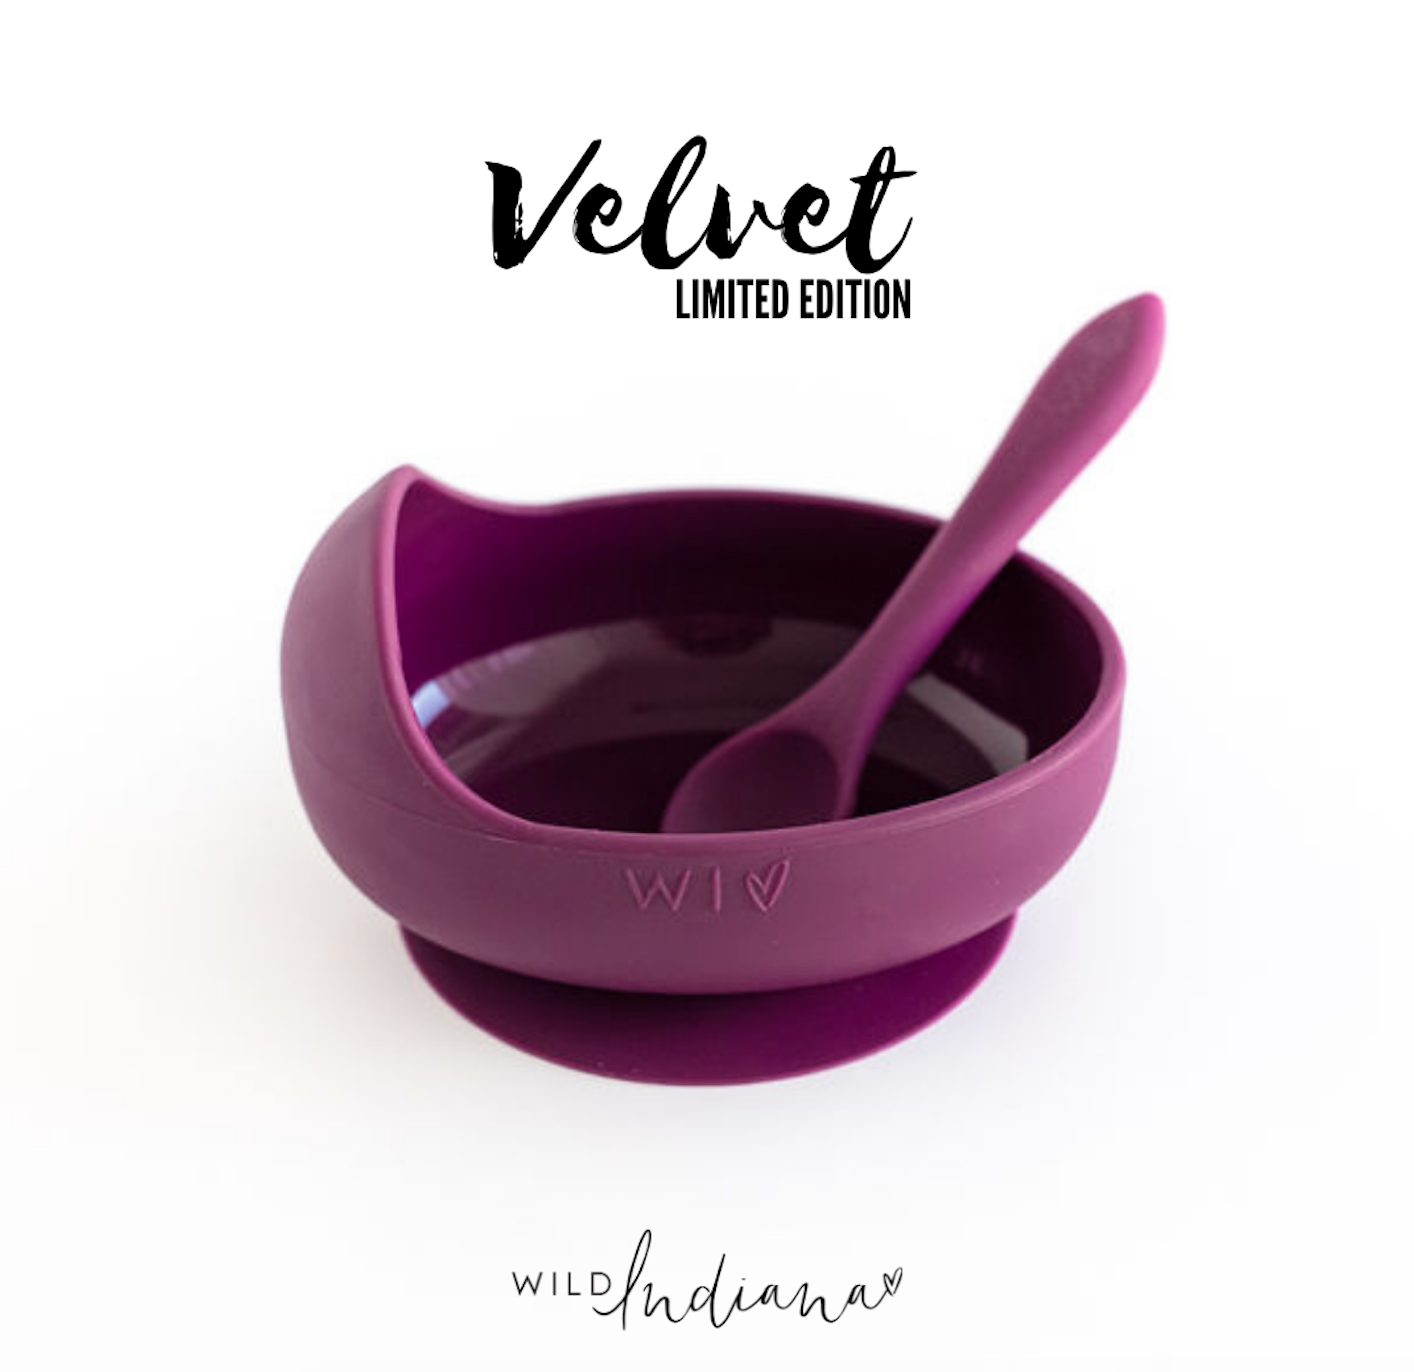 WILD INDIANA - Winter LIMITED EDITION Silicone Bowl Set | Plum